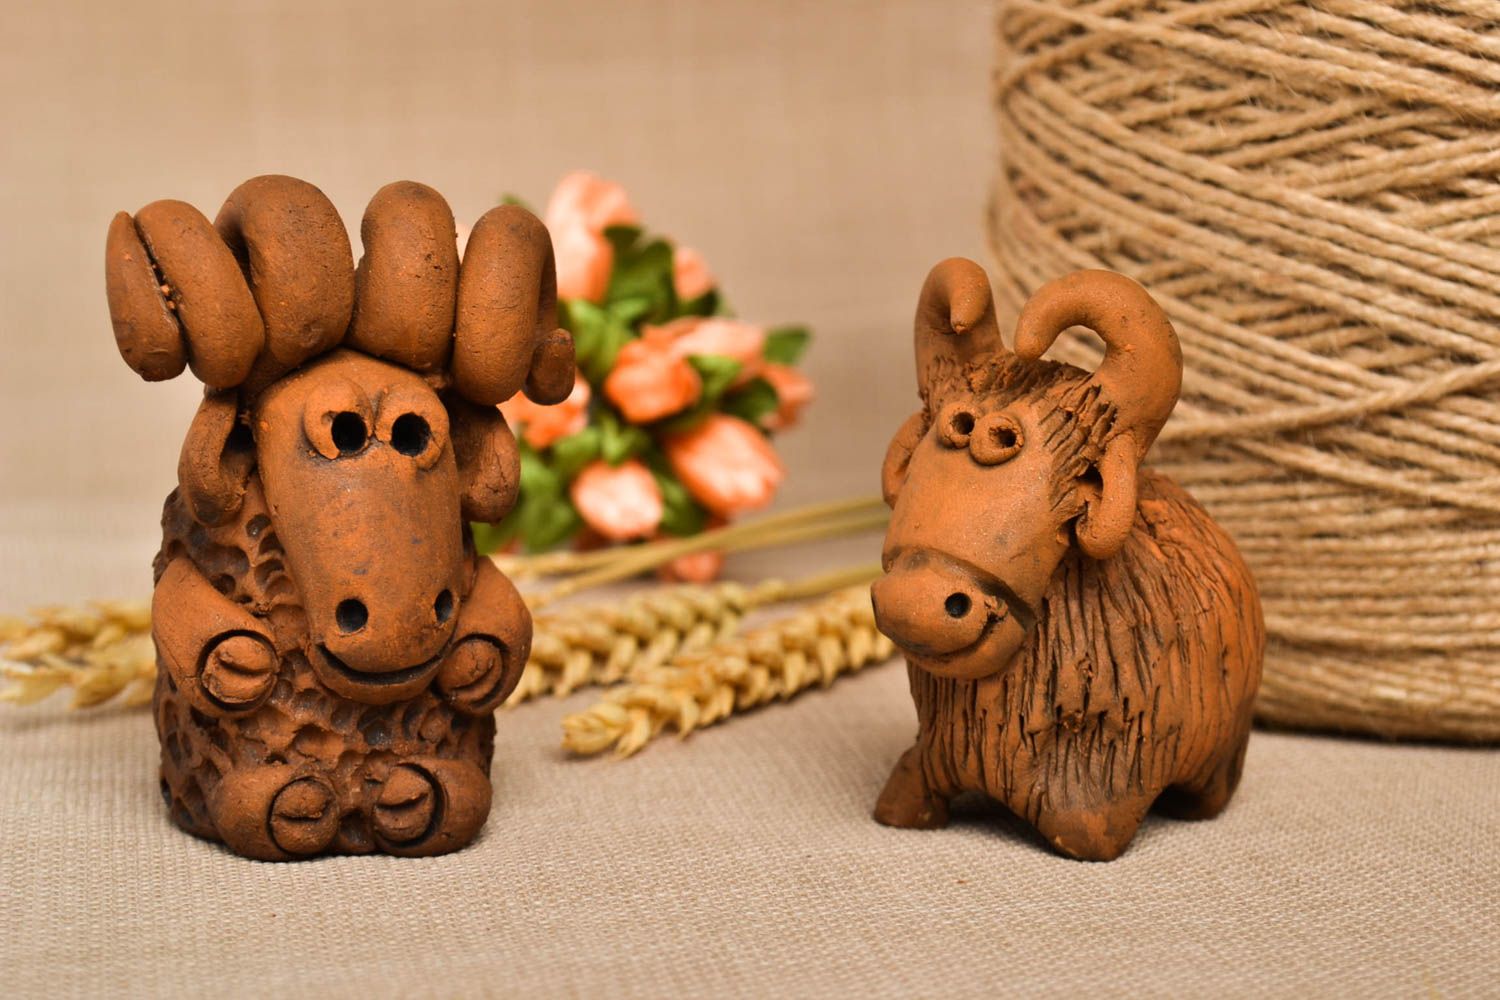 Handmade figurine set of 2 items clay statuette decorative use only gift ideas photo 1